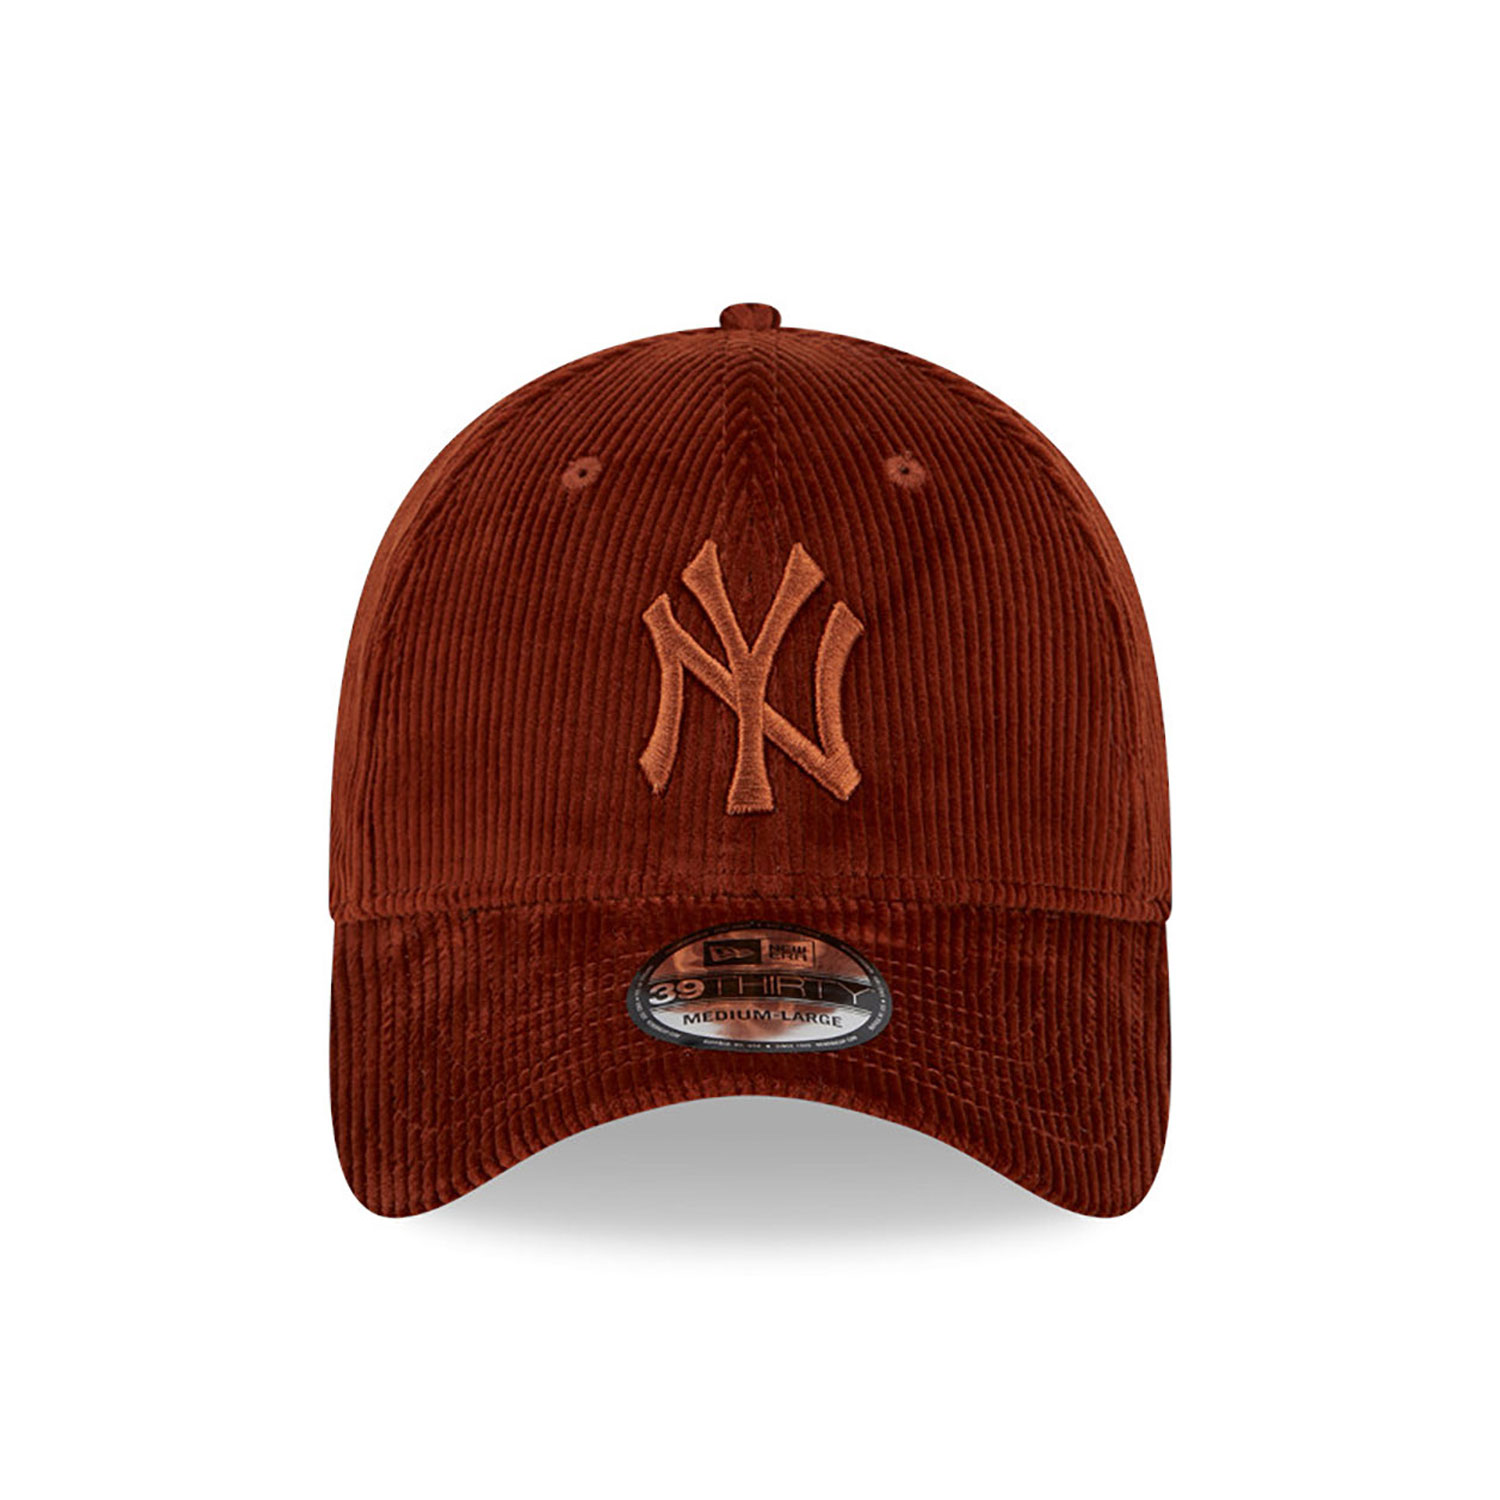 New York Yankees Wide Cord Brown 39THIRTY Stretch Fit Cap